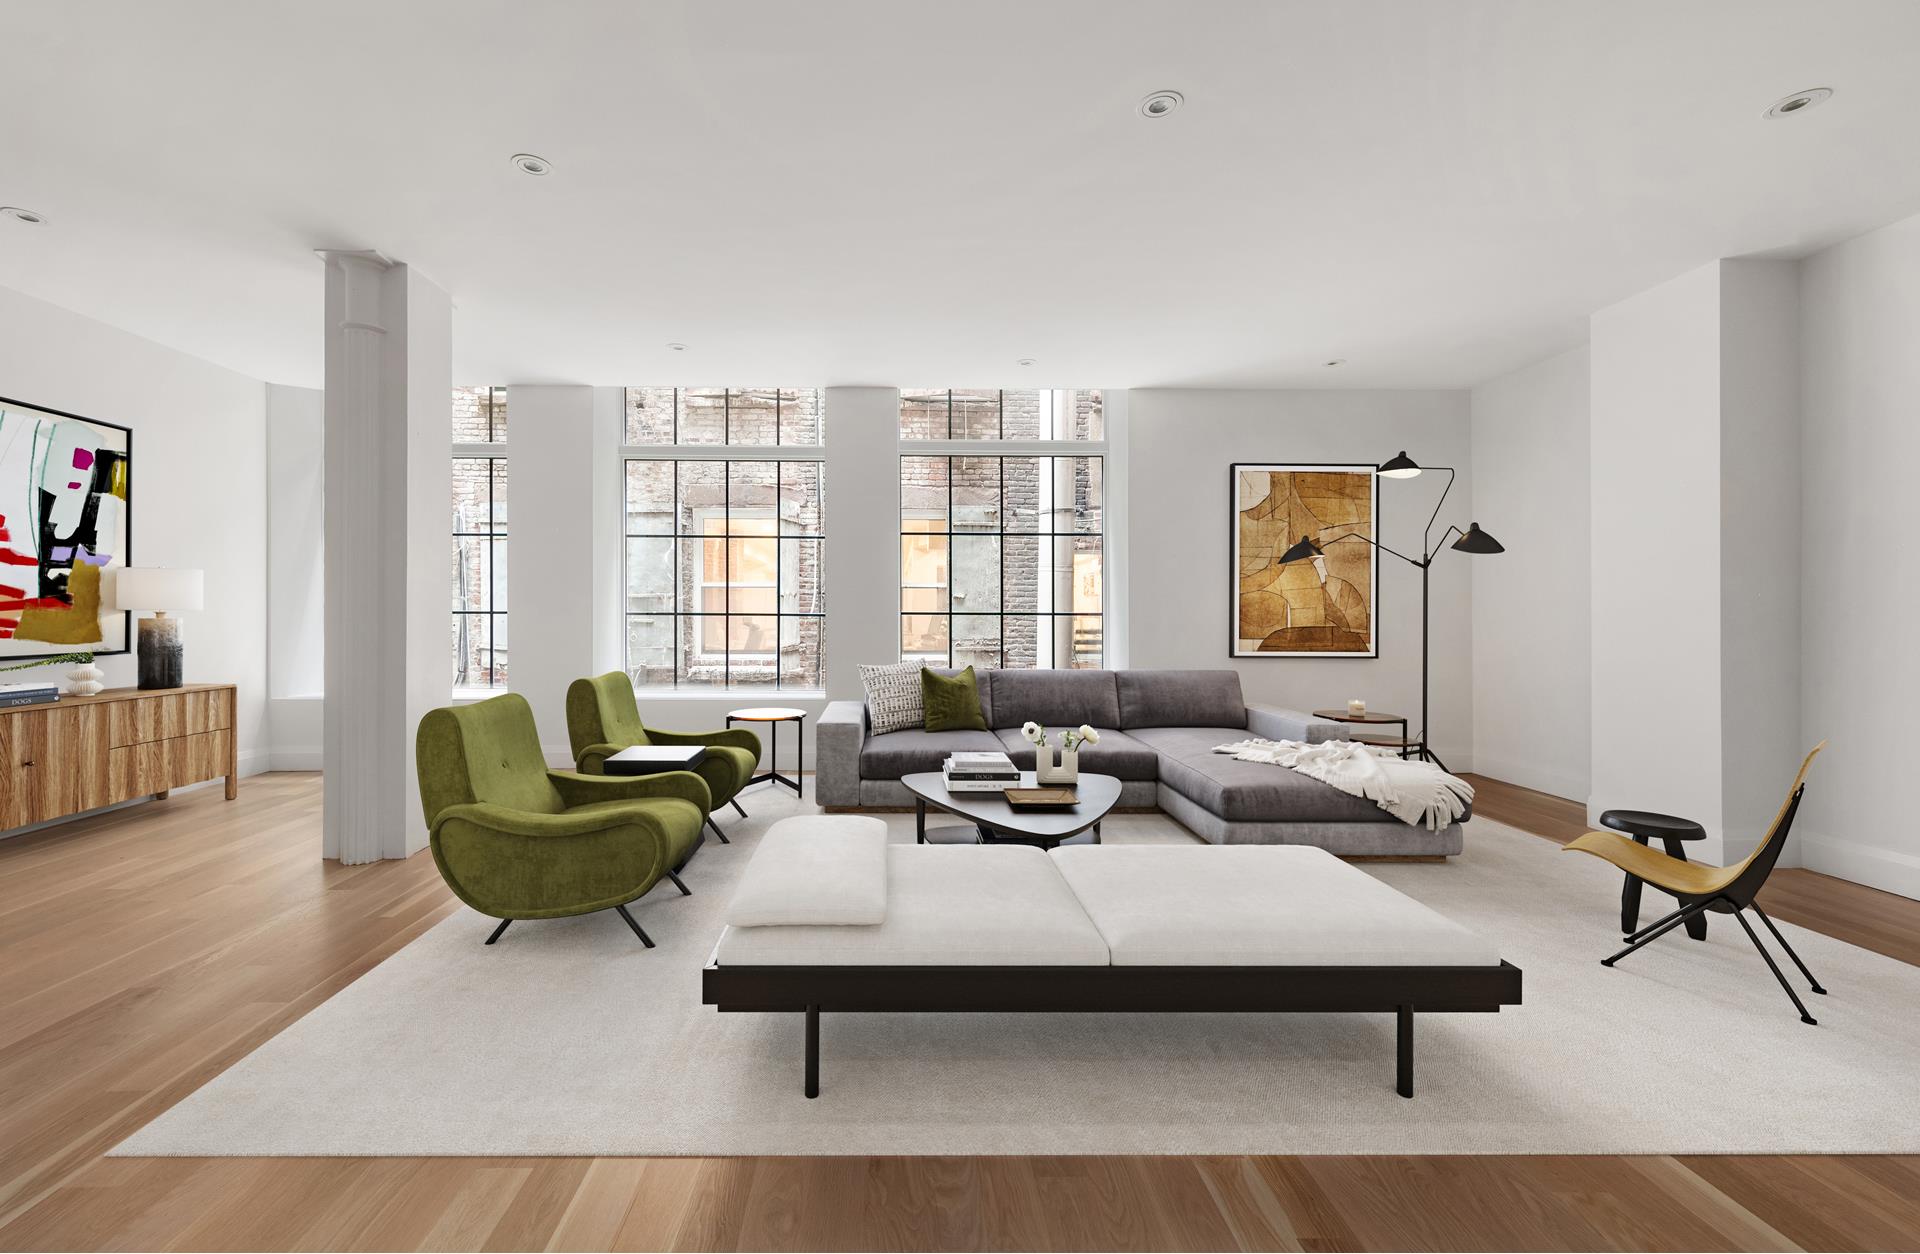 66 Reade Street Th, Tribeca, Downtown, NYC - 4 Bedrooms  
3.5 Bathrooms  
7 Rooms - 